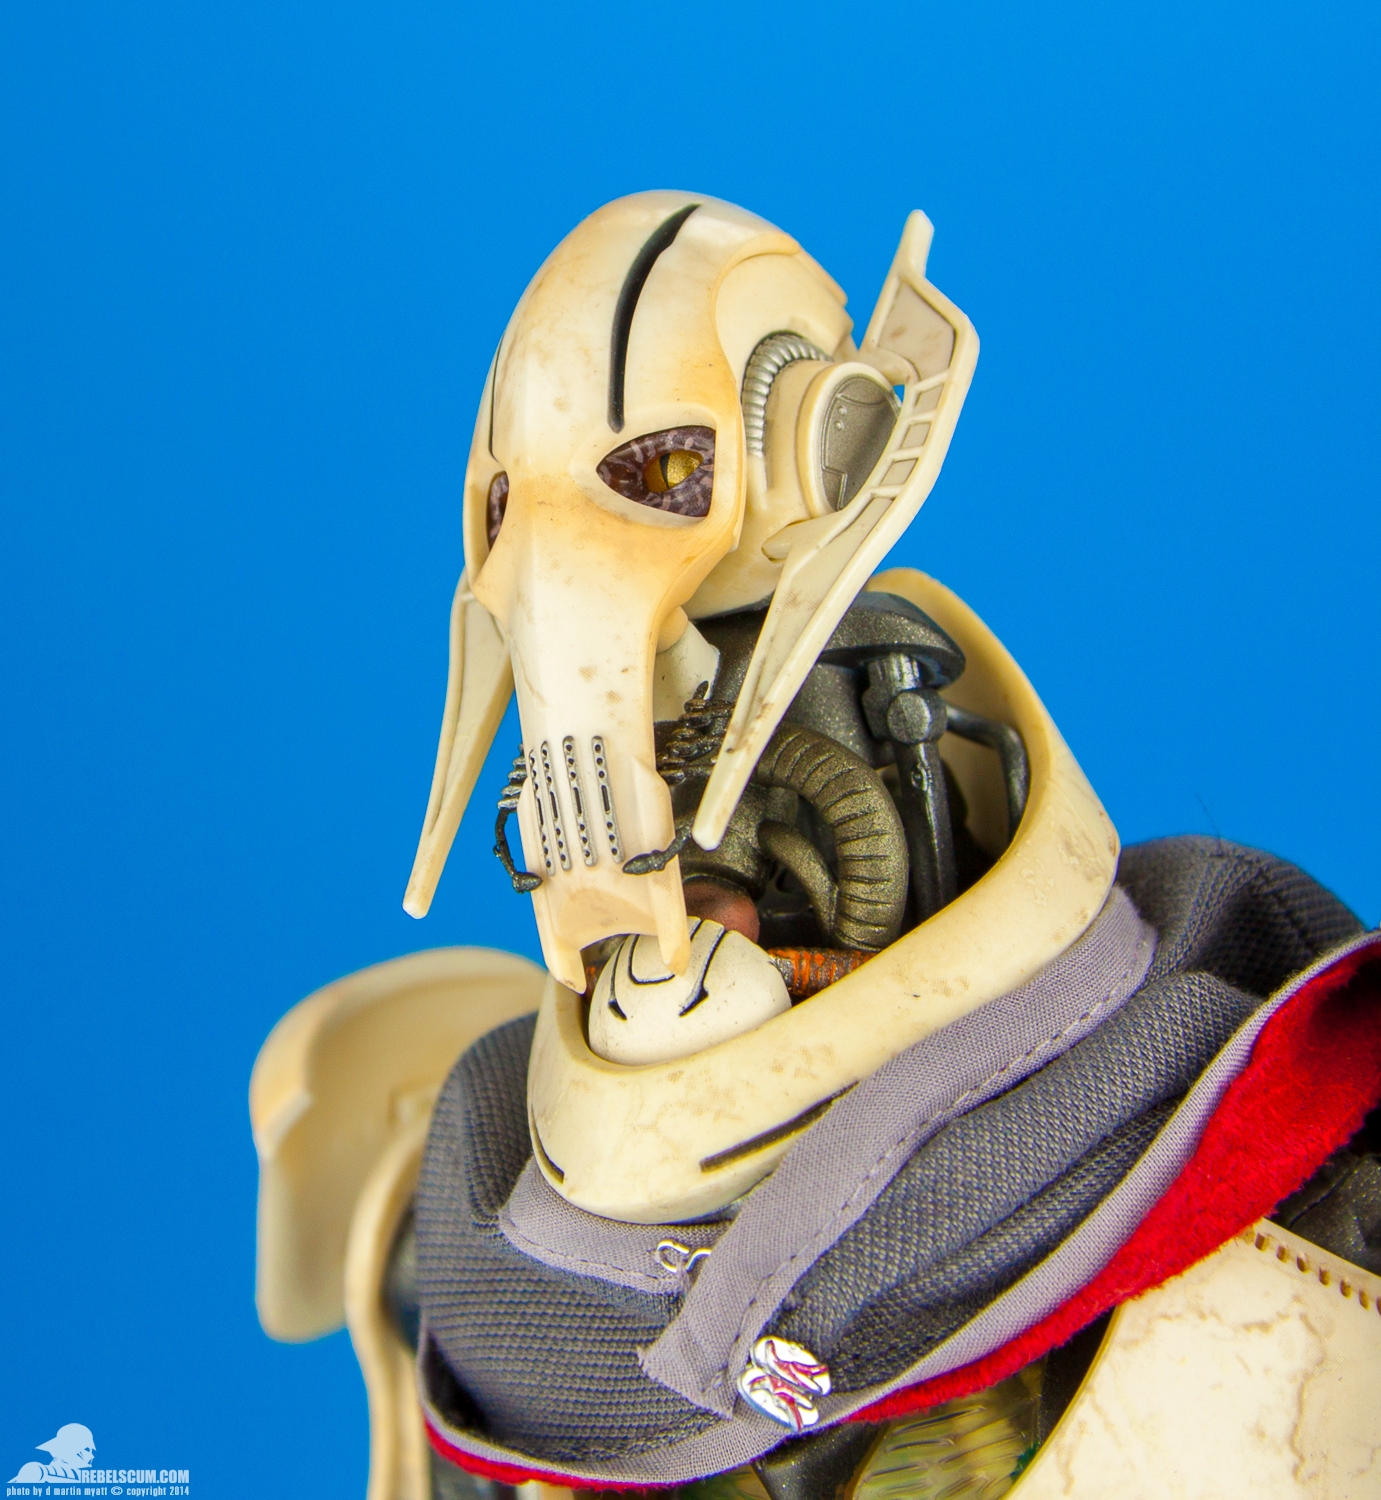 General-Grievous-Sixth-Scale-Figure-Sideshow-Collectibles-011.jpg